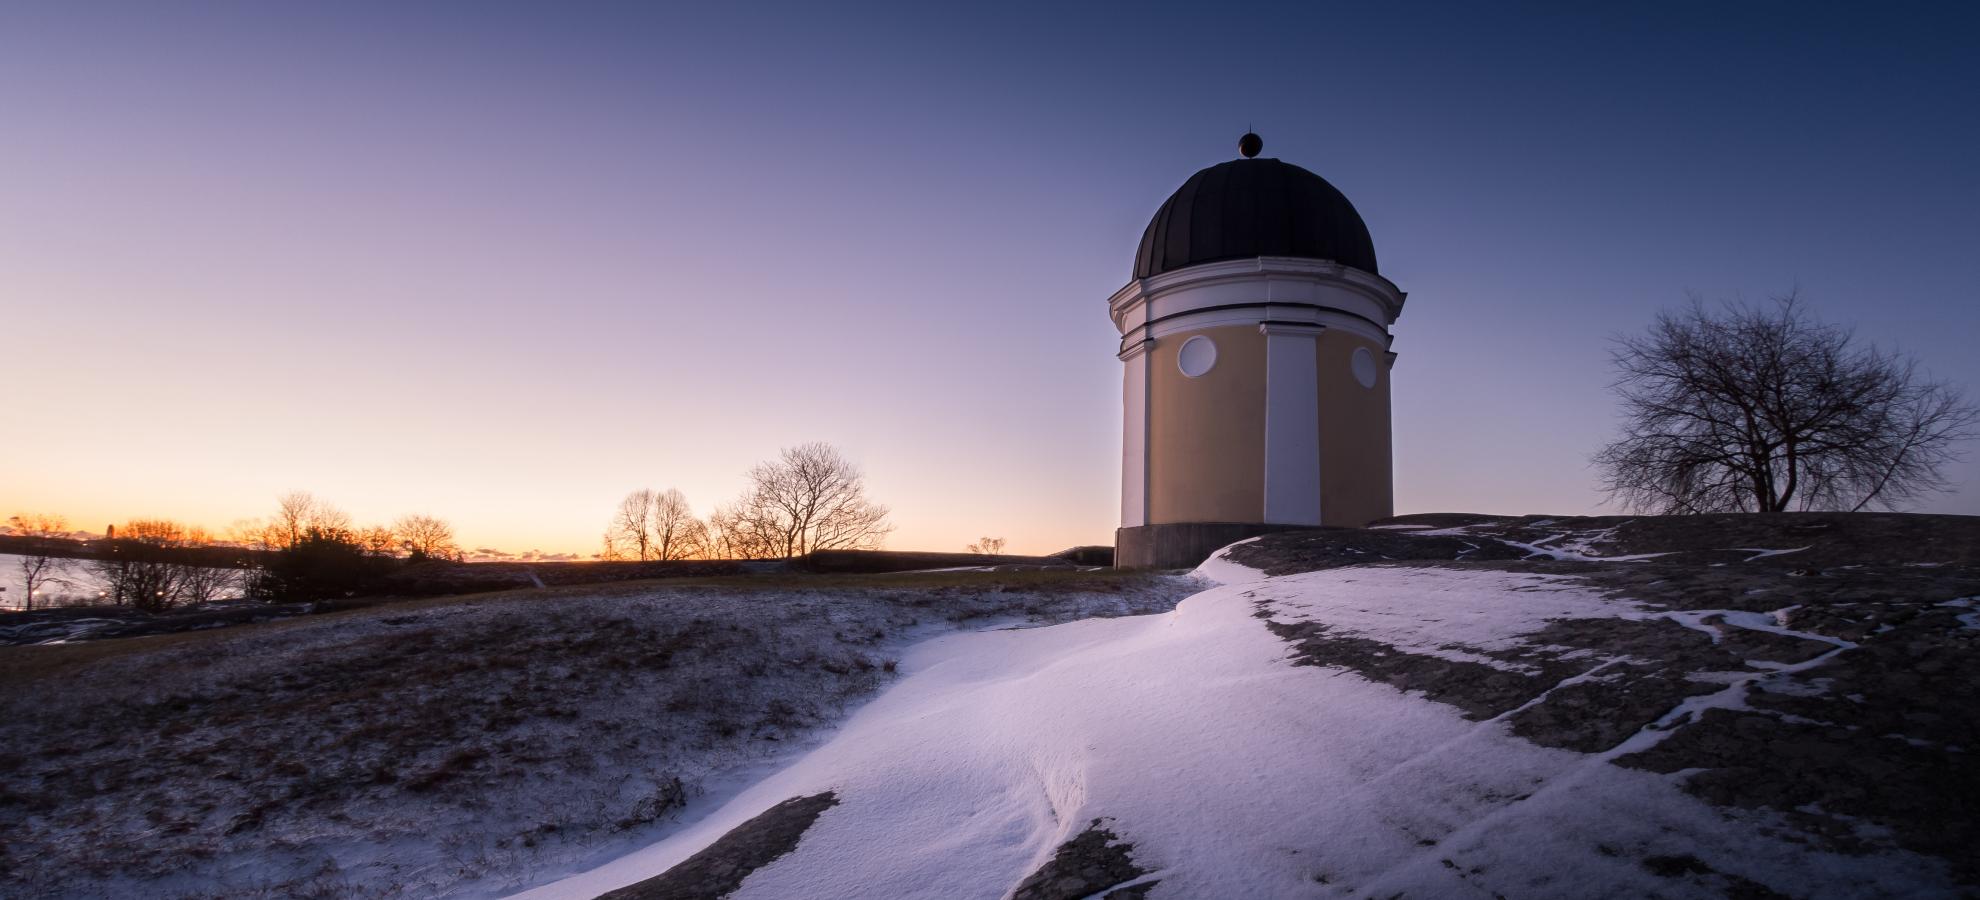 An early morning view of the old Helsinki ‘Kaivopuisto’ observatory 